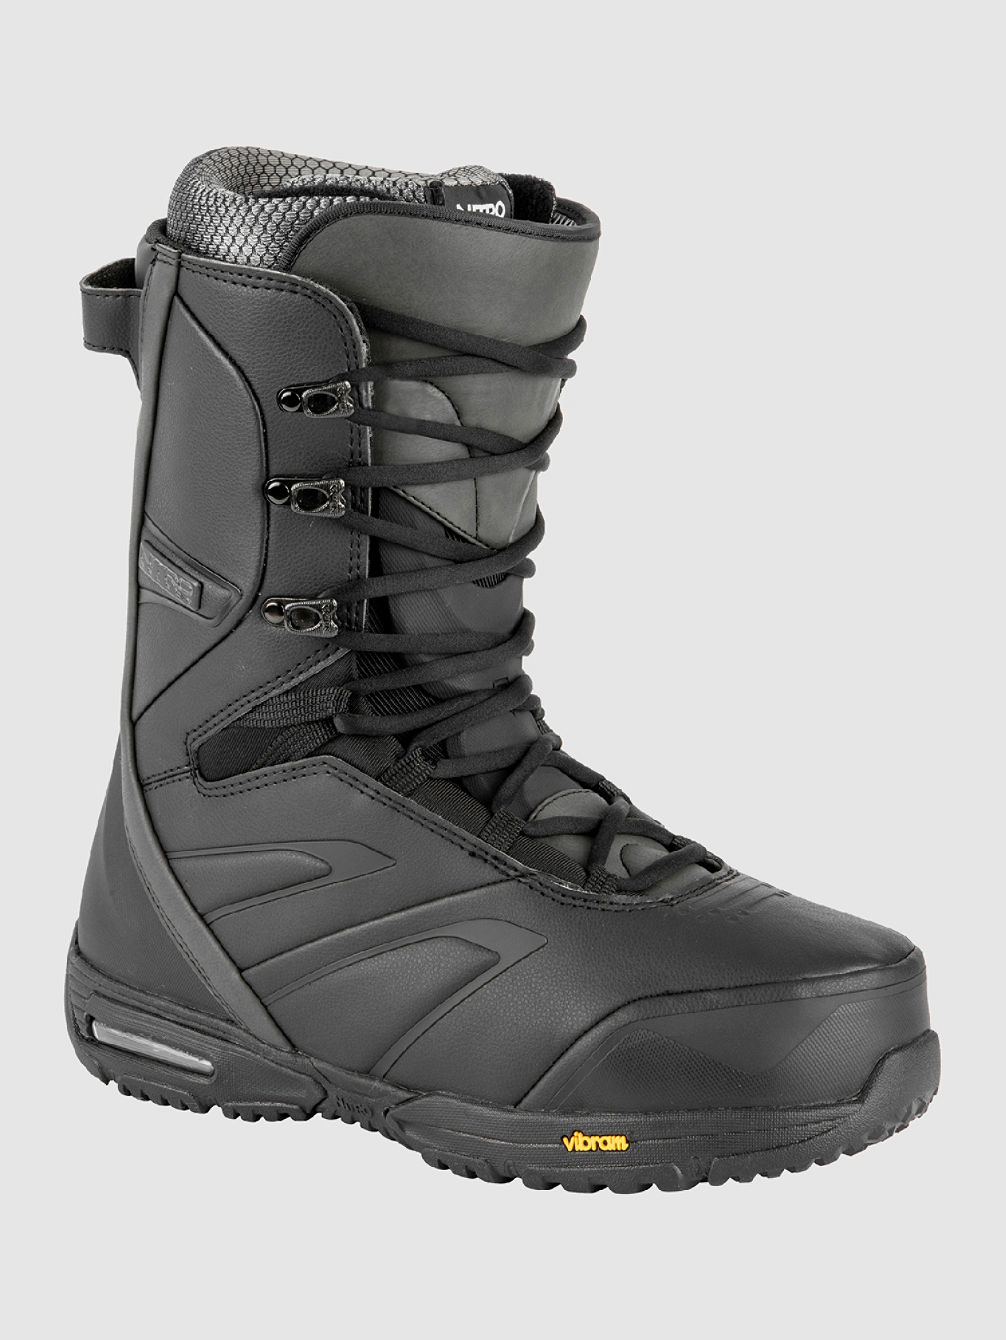 Select Stnd 2023 Snowboard Boots